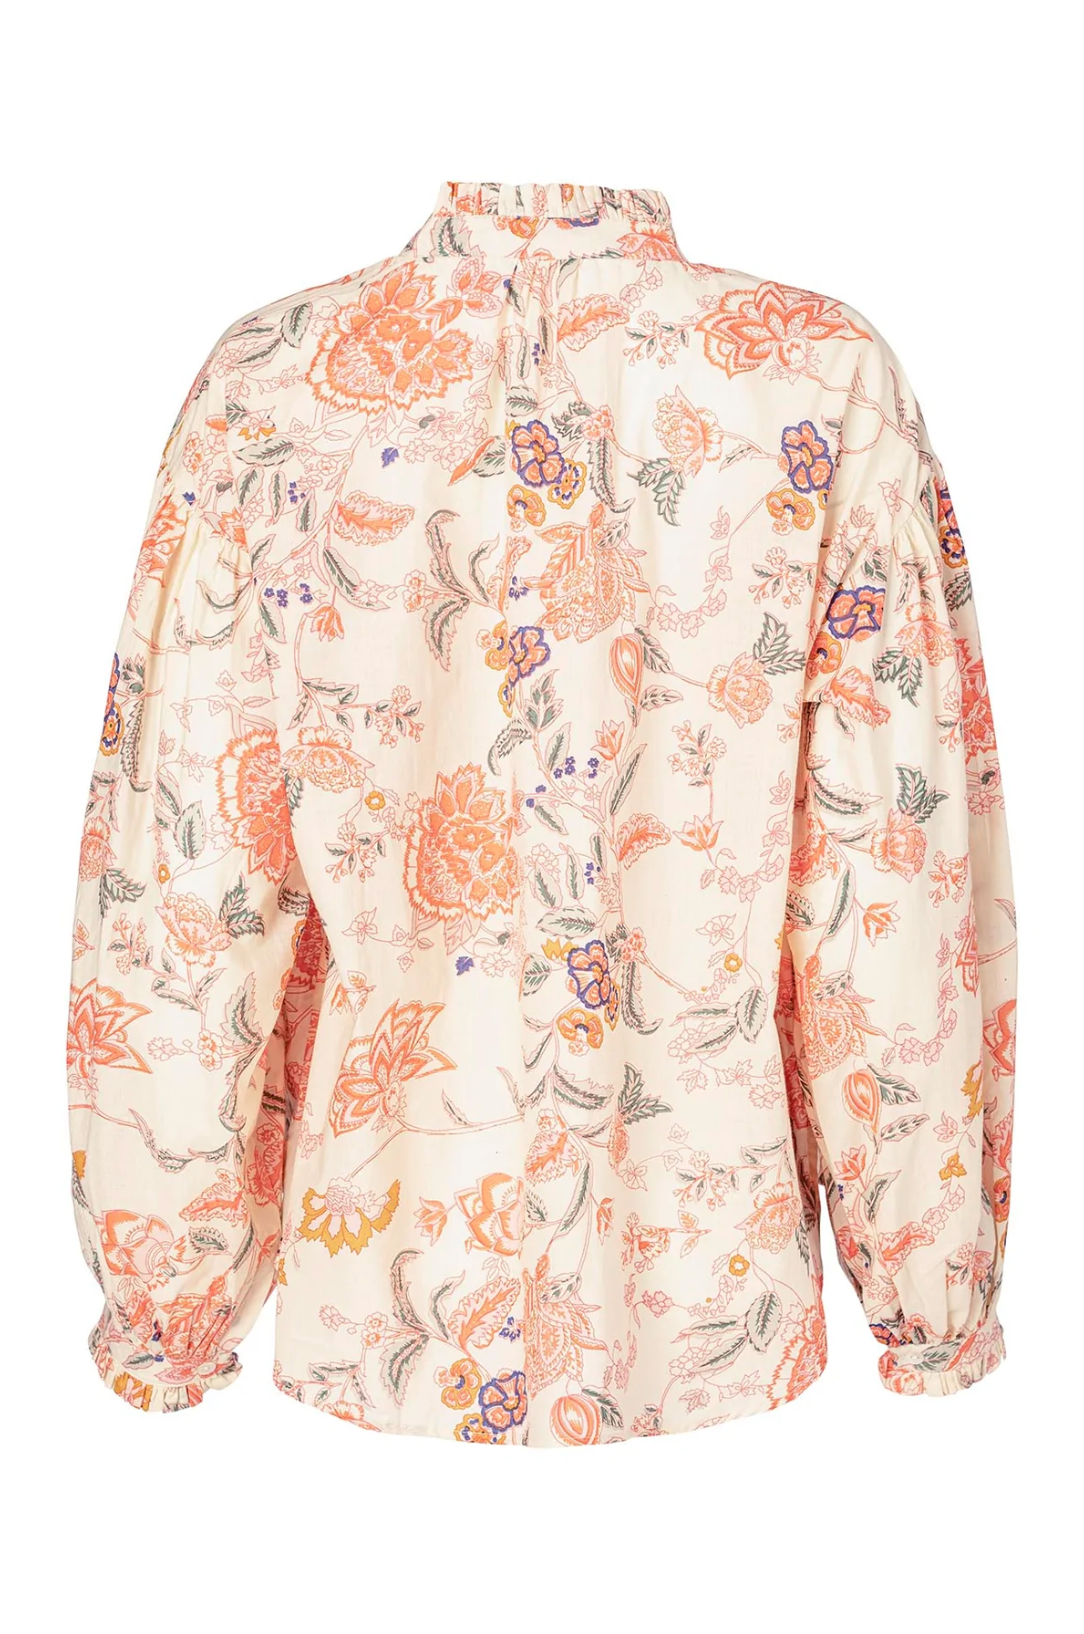 Poet Coral Flower Blouse, Pink Camation